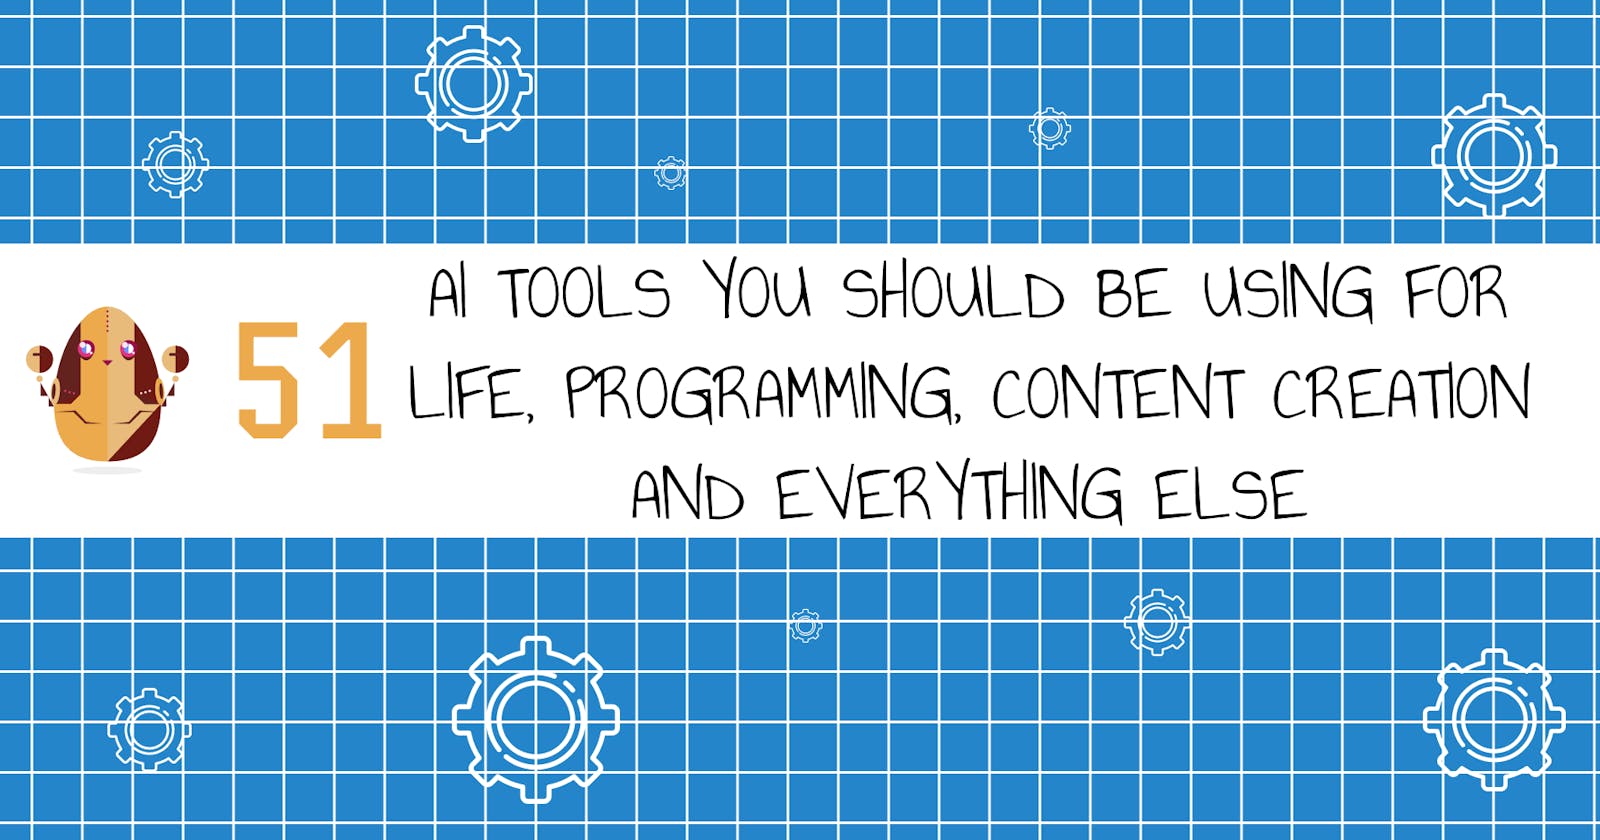 51 AI tools you should be using for life, programming, content creation and everything else